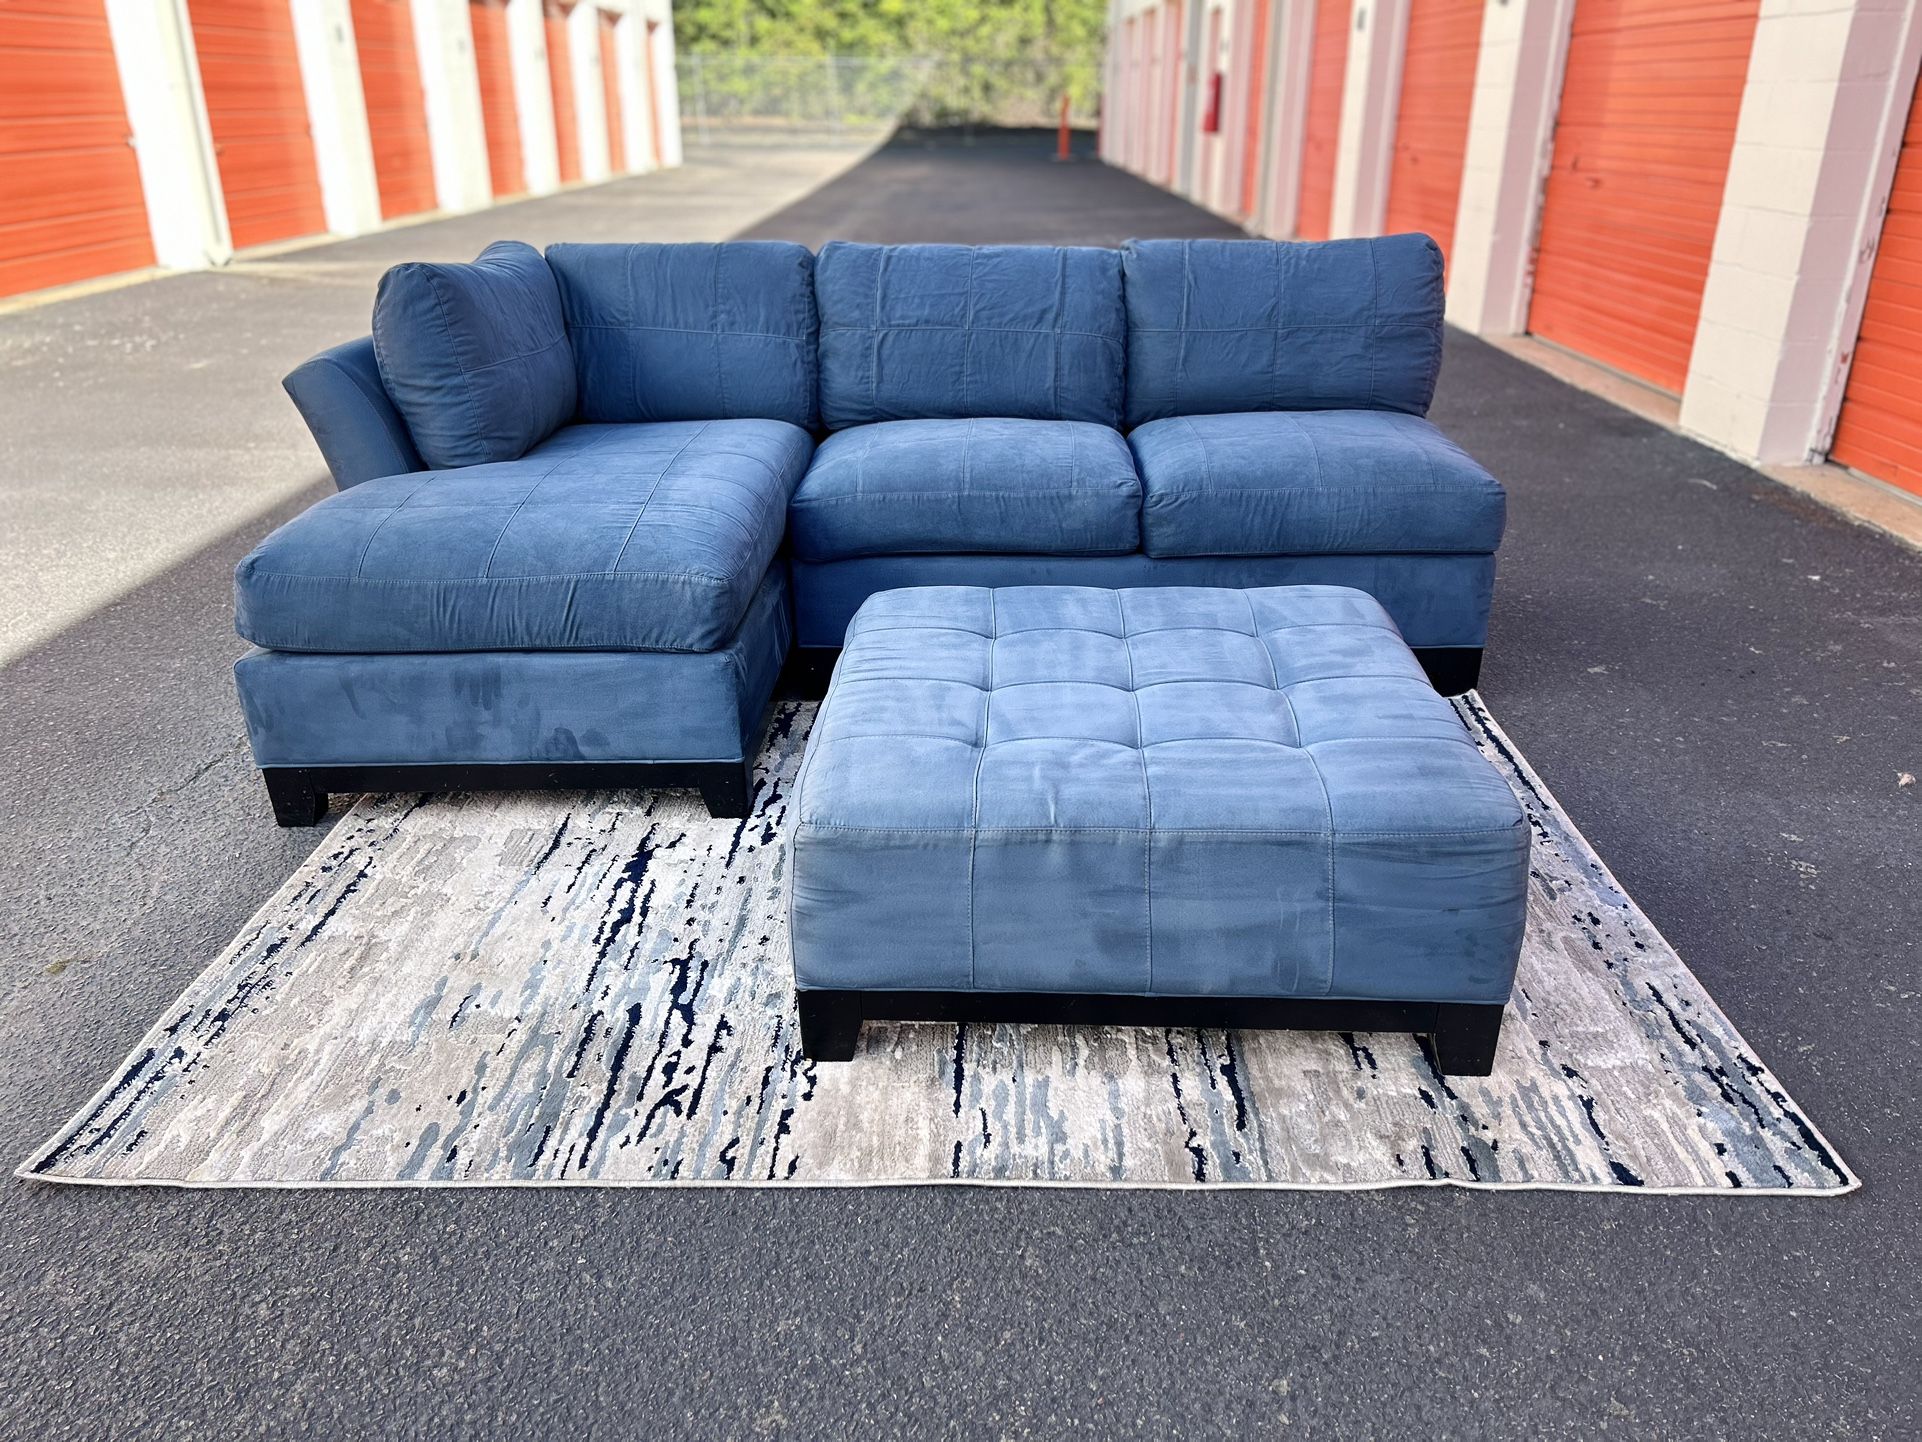 Cindy Crawford Blue Sectional Couch with Ottoman *FREE DELIVERY*